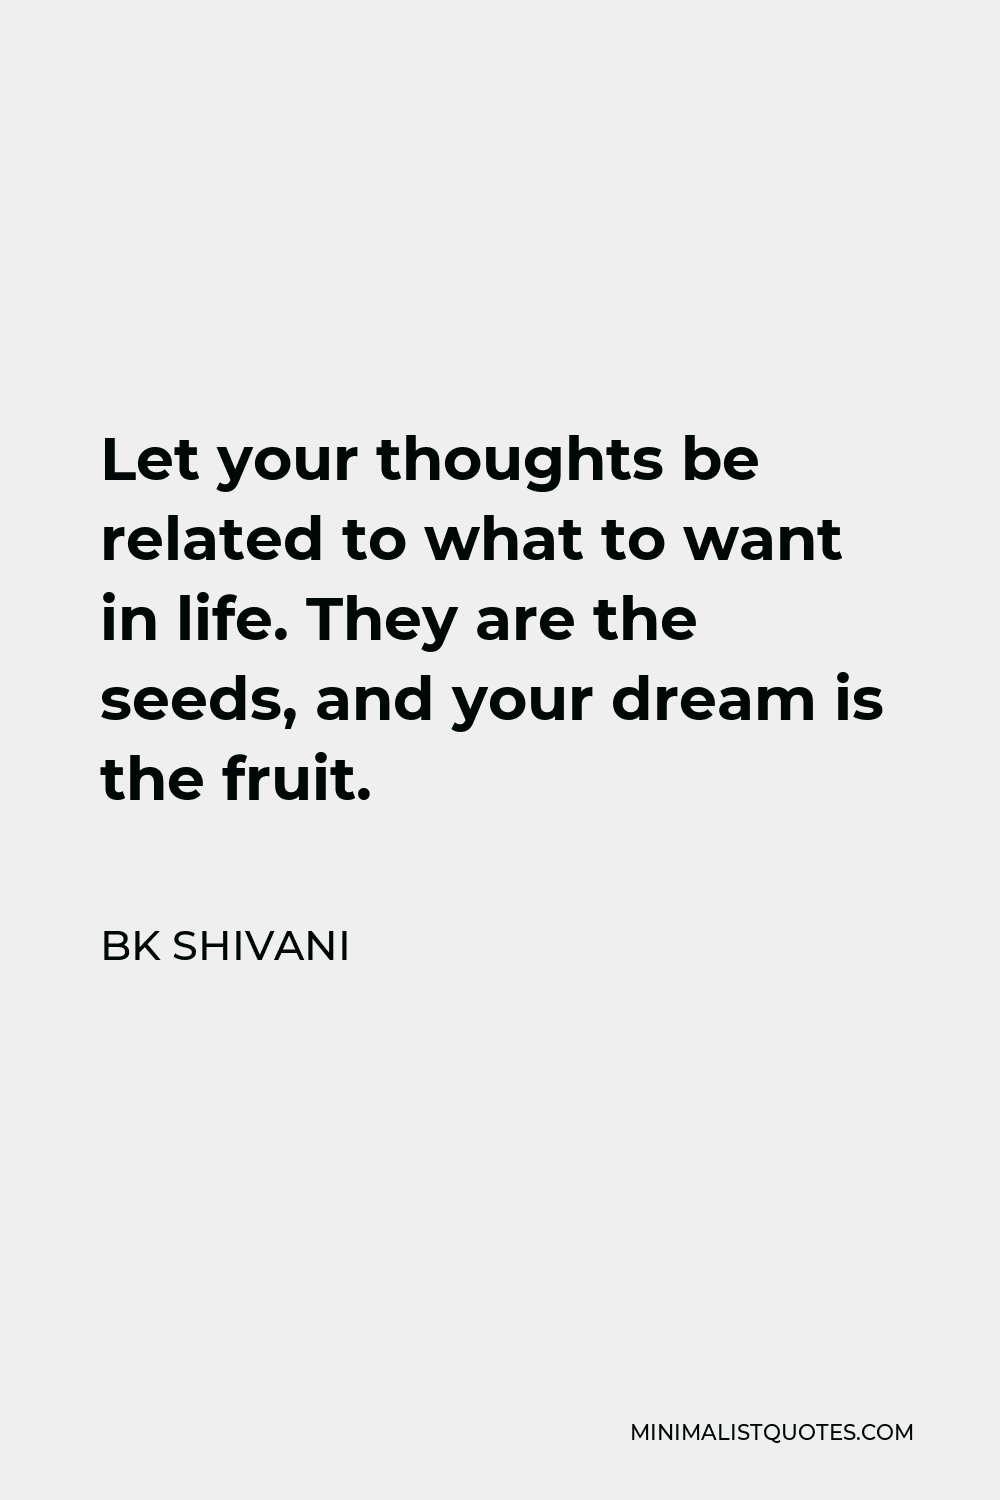 BK Shivani Quote - Let your thoughts be related to what to want in life. They are the seeds, and your dream is the fruit.